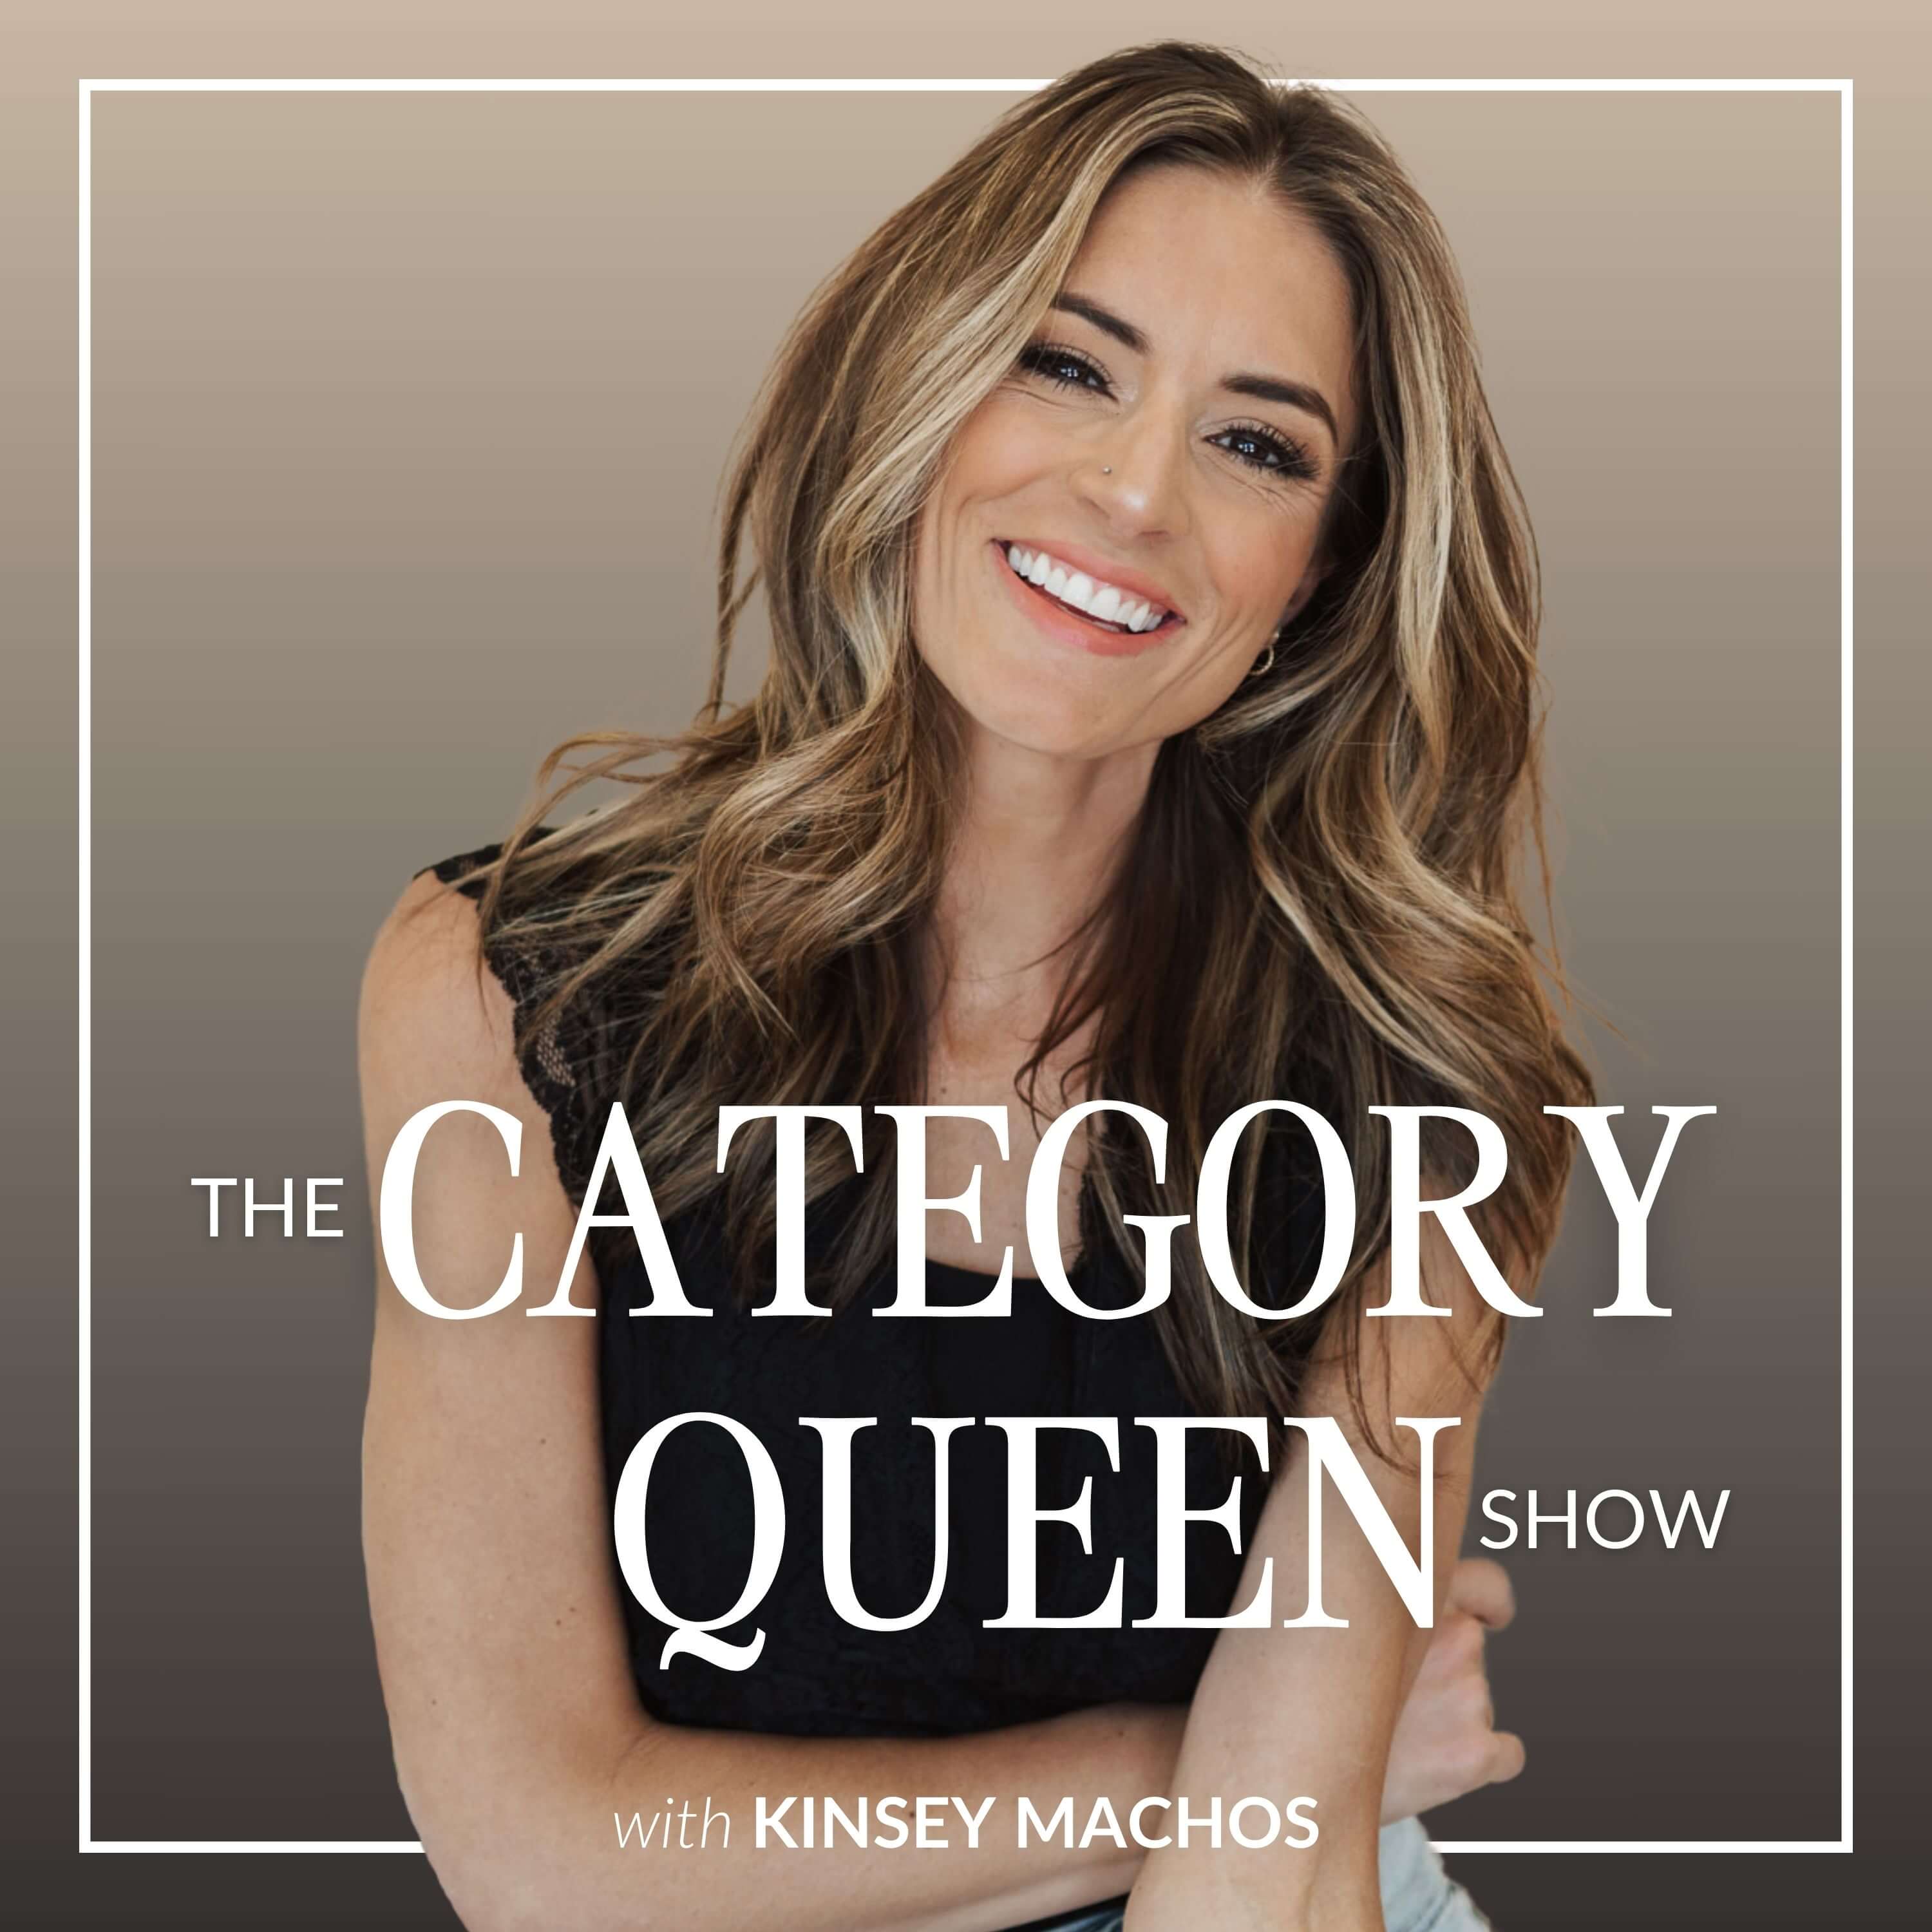 Artwork for The Category Queen Show